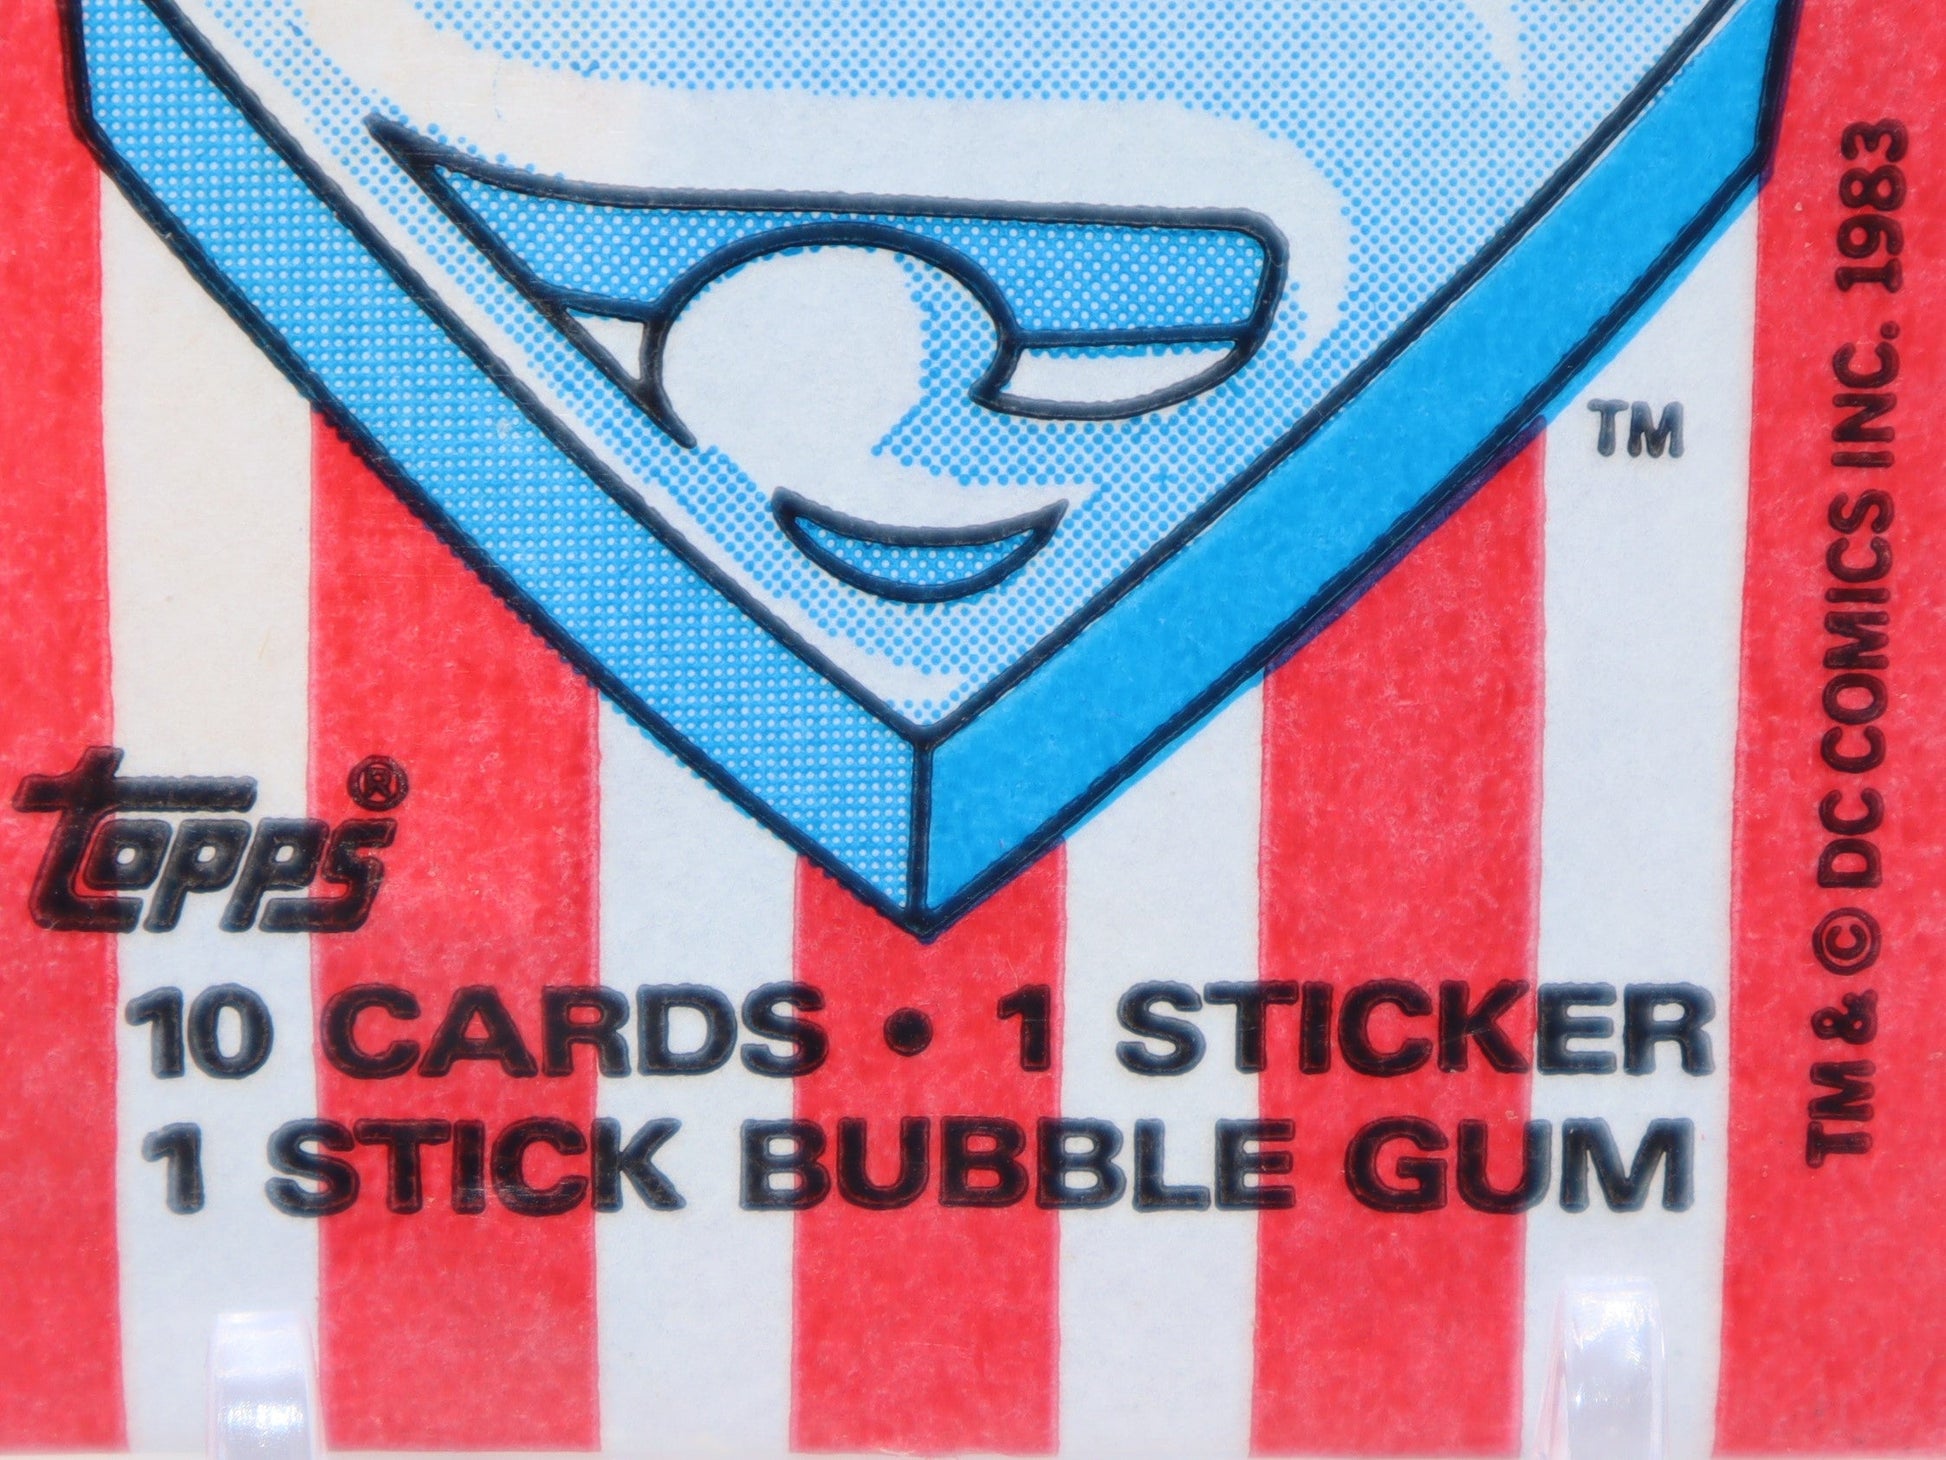 1983 Topps Superman III Trading Cards Wax Pack - Collectibles